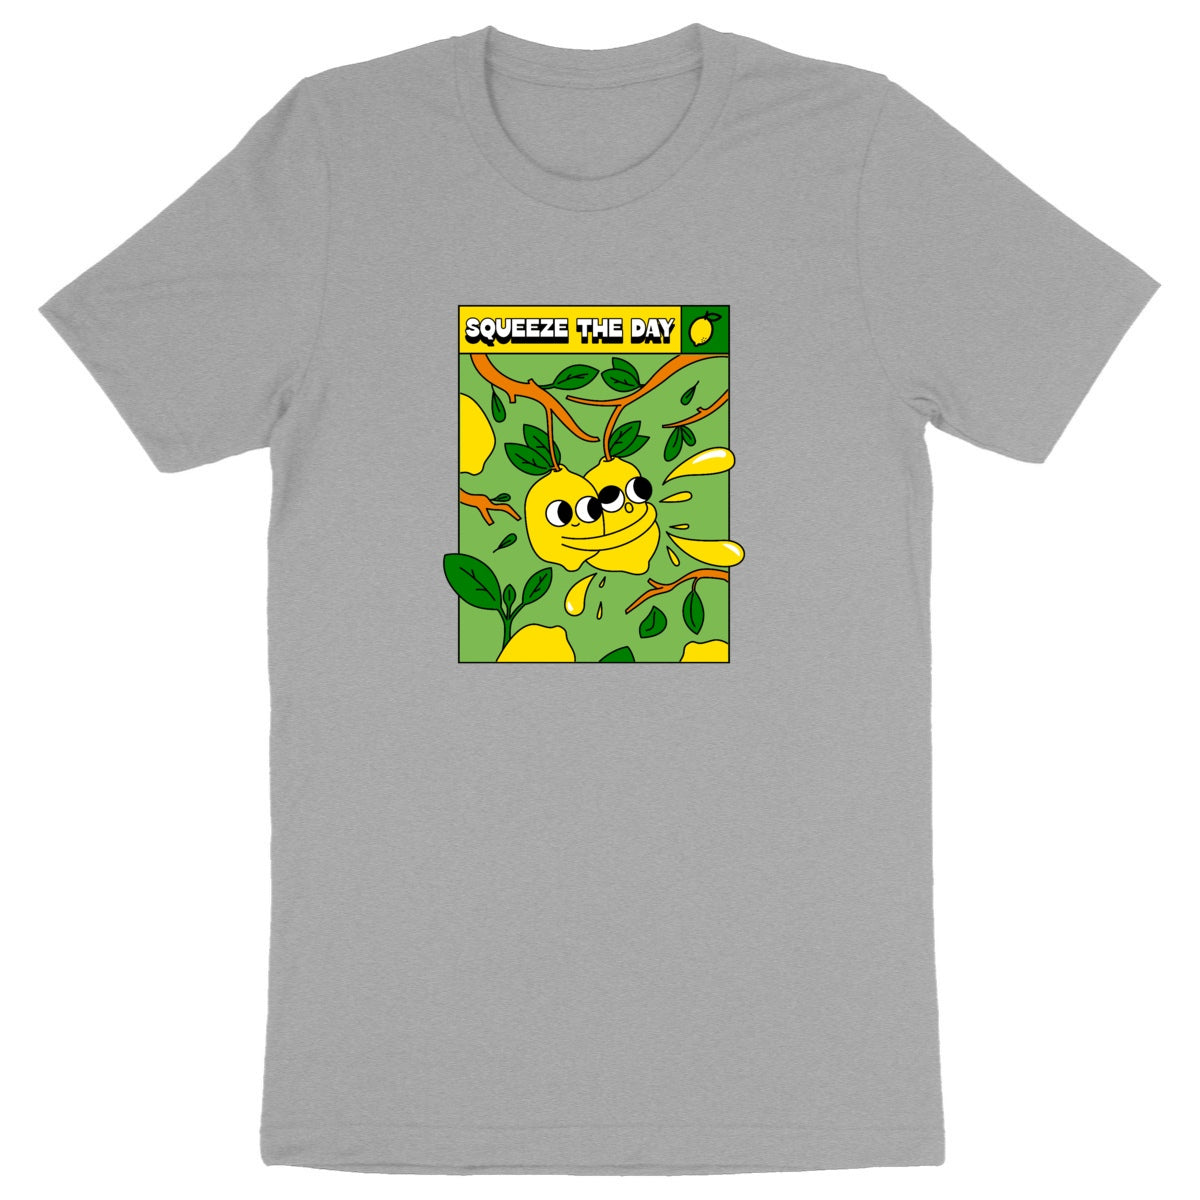 Squeez the day - Unisex Organic T-shirt